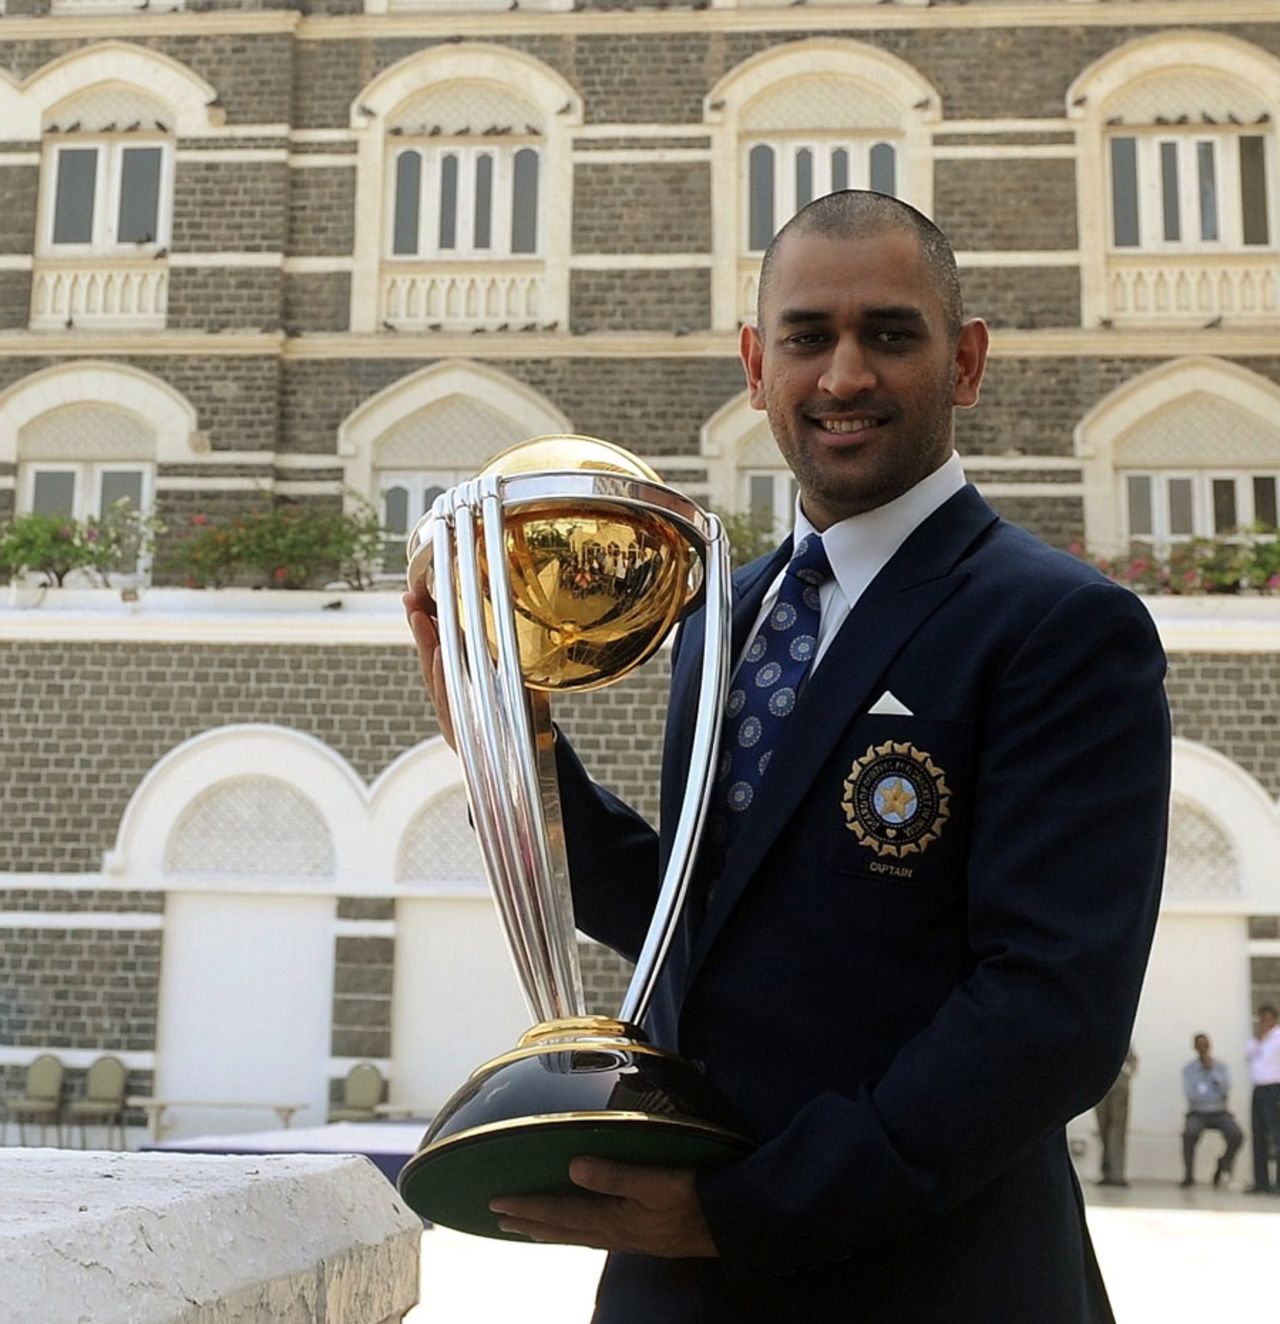 MS Dhoni with the World Cup trophy on the morning after the final, Mumbai, April 3, 2011